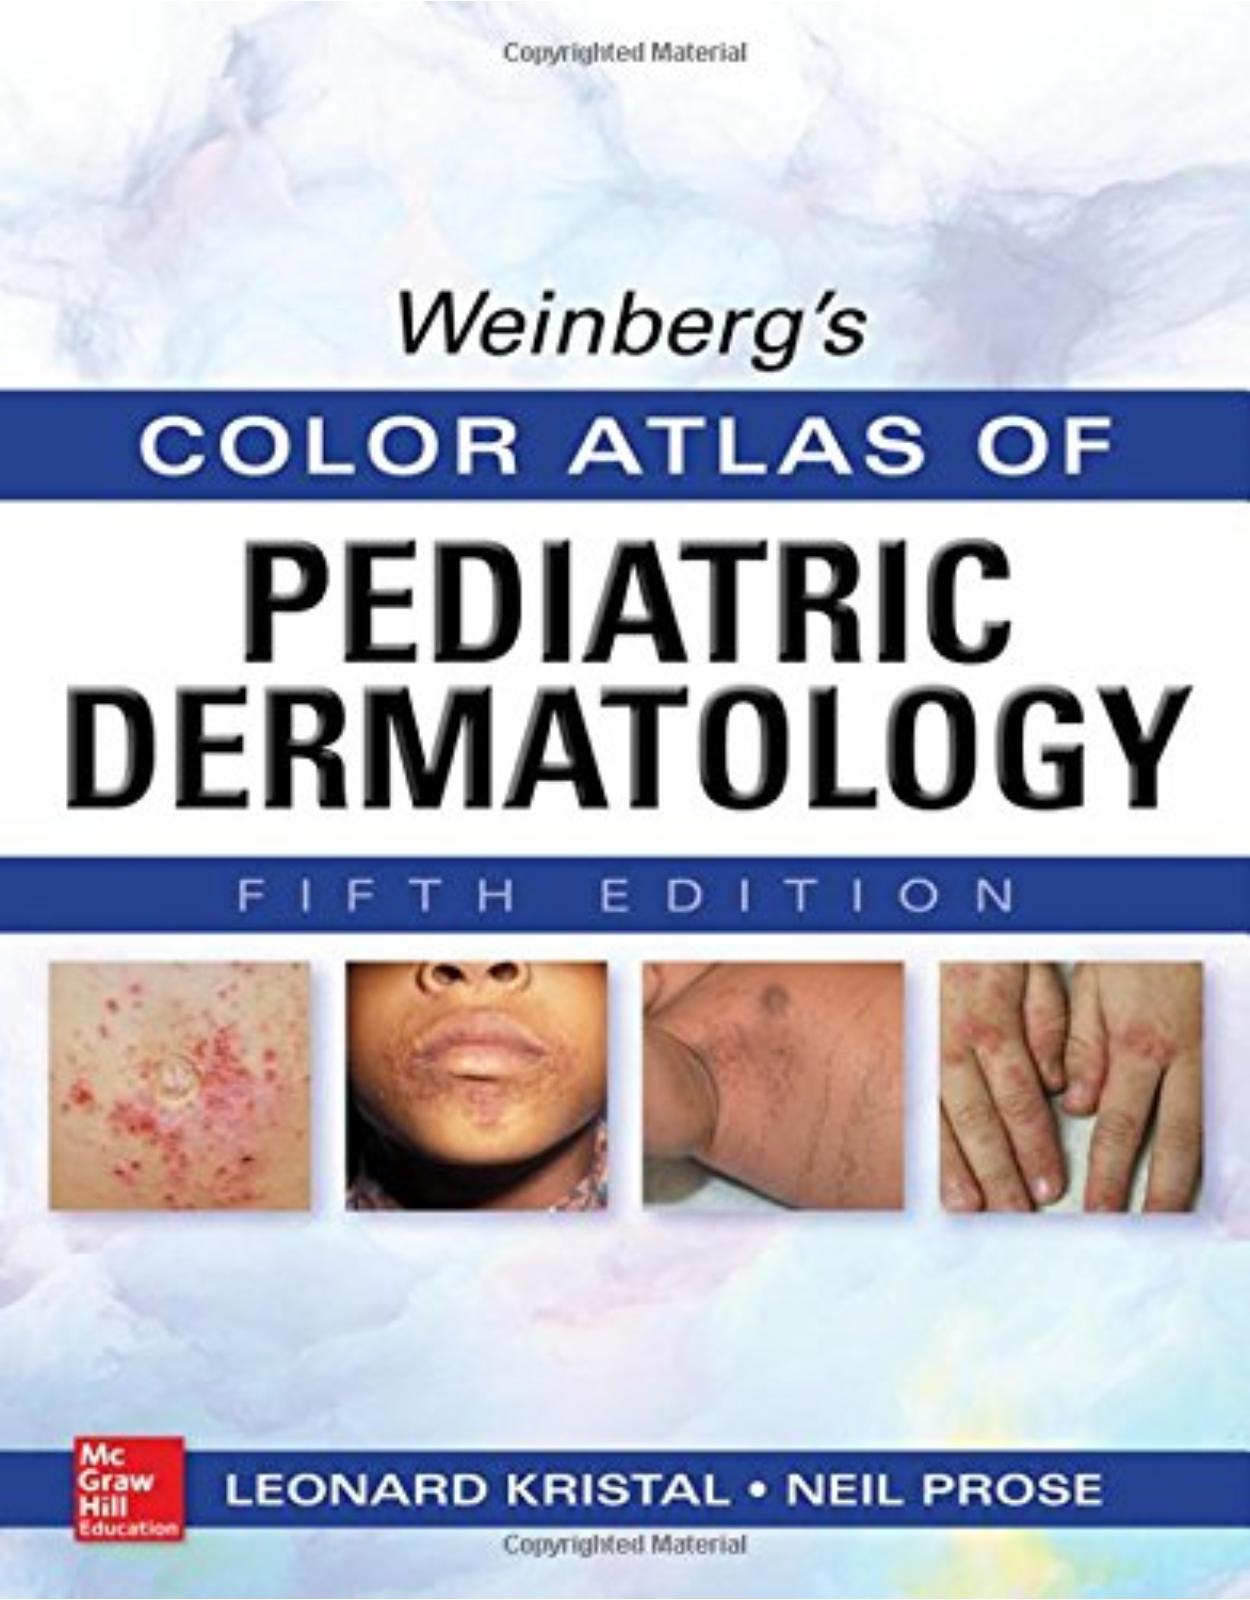 Weinberg's Color Atlas of Pediatric Dermatology, Fifth Edition 